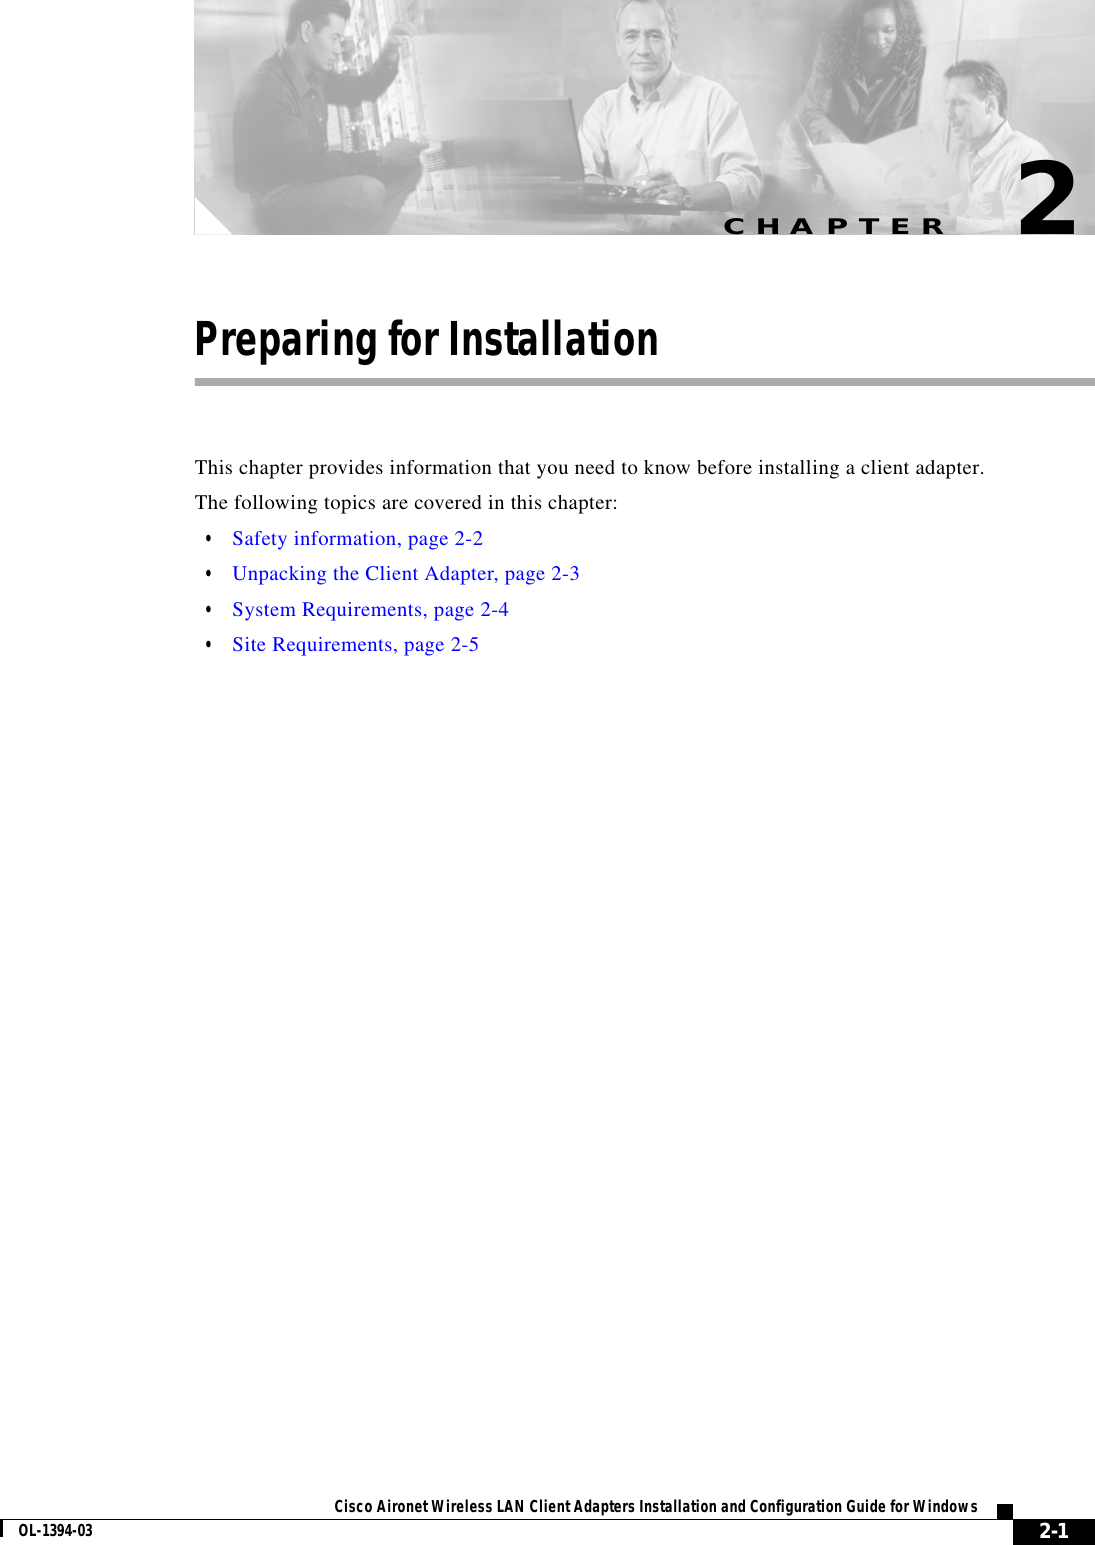 CHAPTER2-1Cisco Aironet Wireless LAN Client Adapters Installation and Configuration Guide for WindowsOL-1394-032Preparing for InstallationThis chapter provides information that you need to know before installing a client adapter.The following topics are covered in this chapter:•Safety information, page 2-2•Unpacking the Client Adapter, page 2-3•System Requirements, page 2-4•Site Requirements, page 2-5